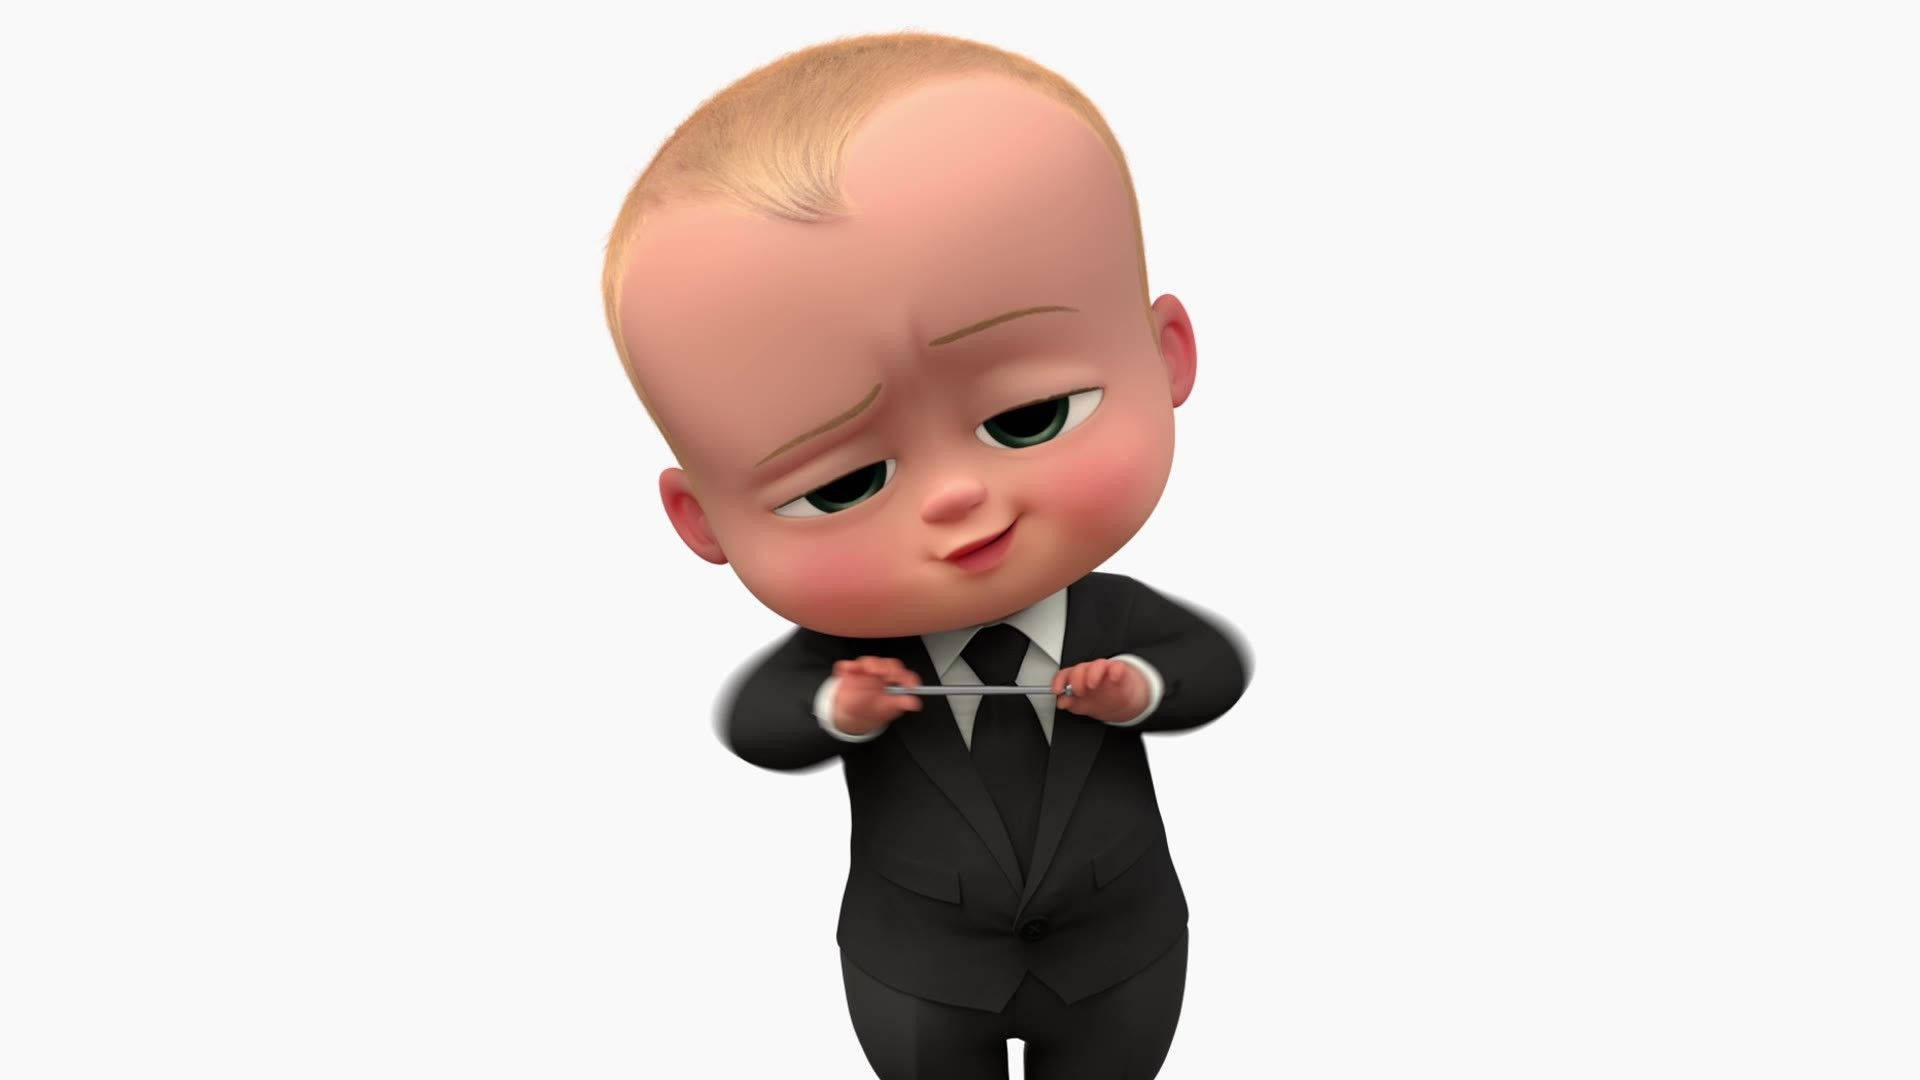 The Boss Baby In Black Suit